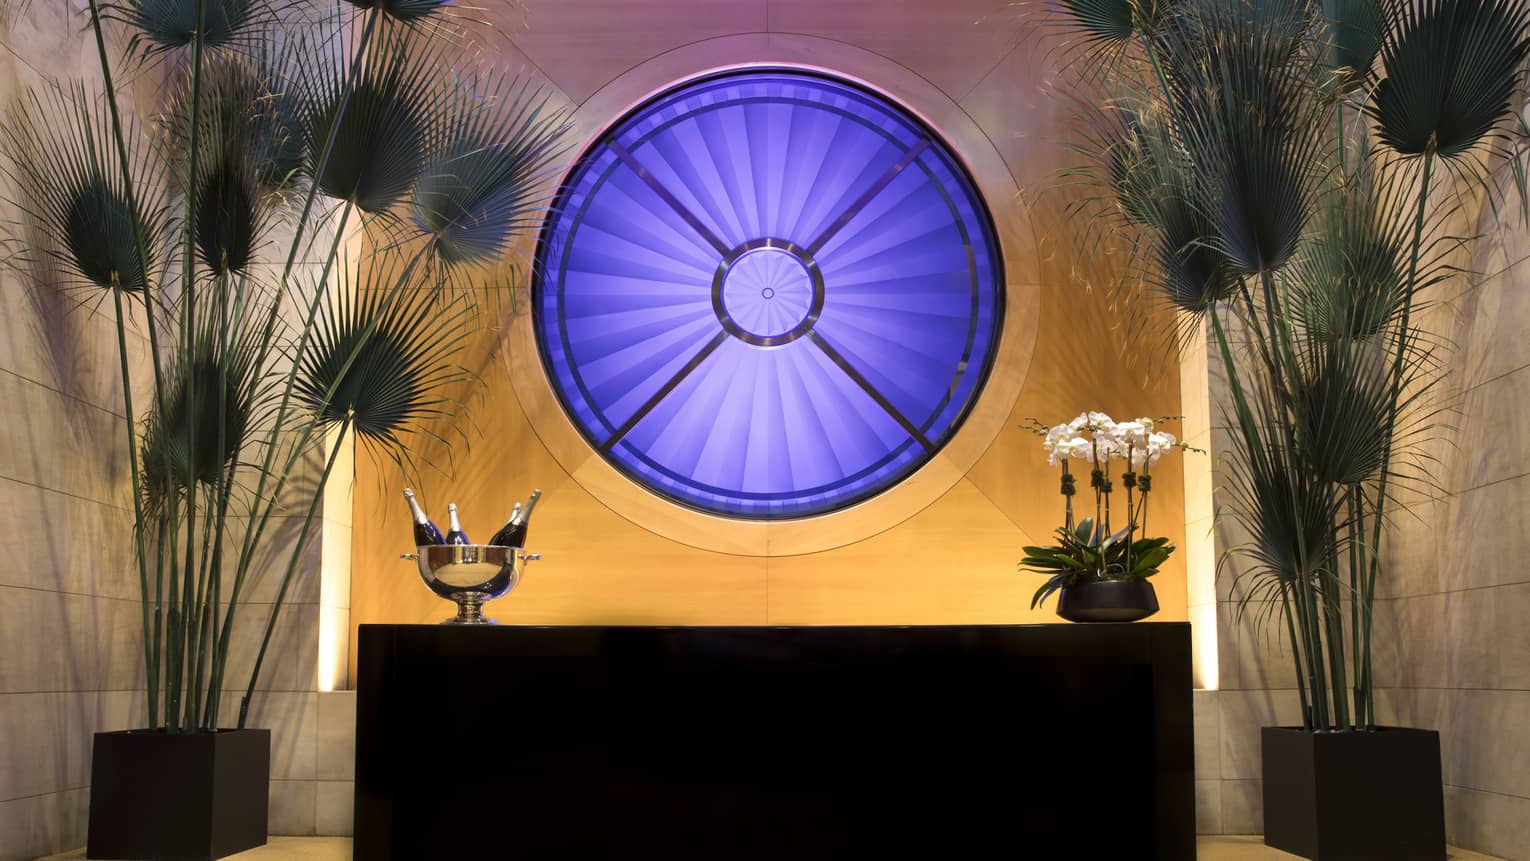 Fifty7 Center round blue Oculus window over buffet table with Champagne, tall fan-shaped tropical plants